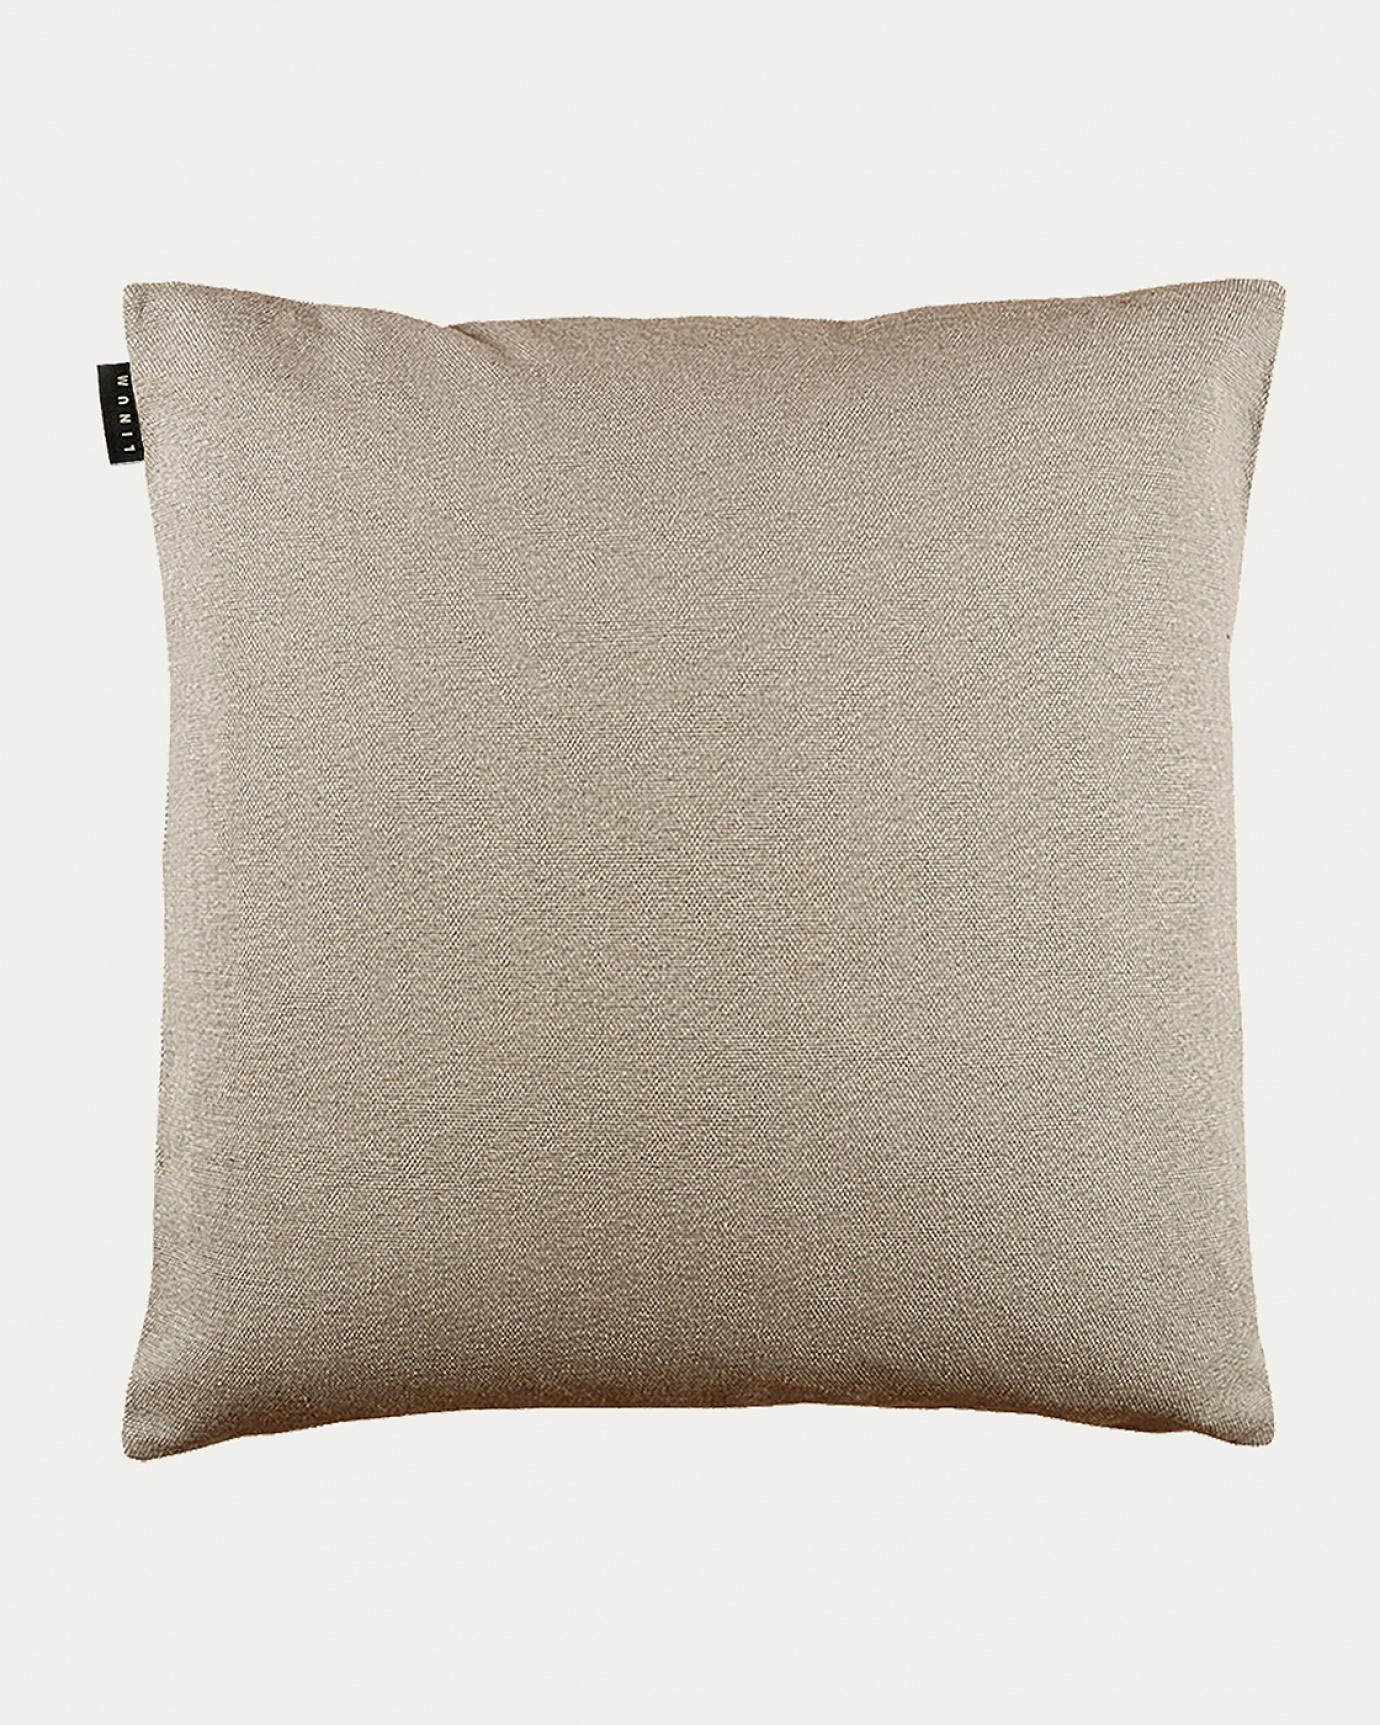 Product image light bear brown PEPPER cushion cover made of soft cotton from LINUM DESIGN. Easy to wash and durable for generations. Size 60x60 cm.